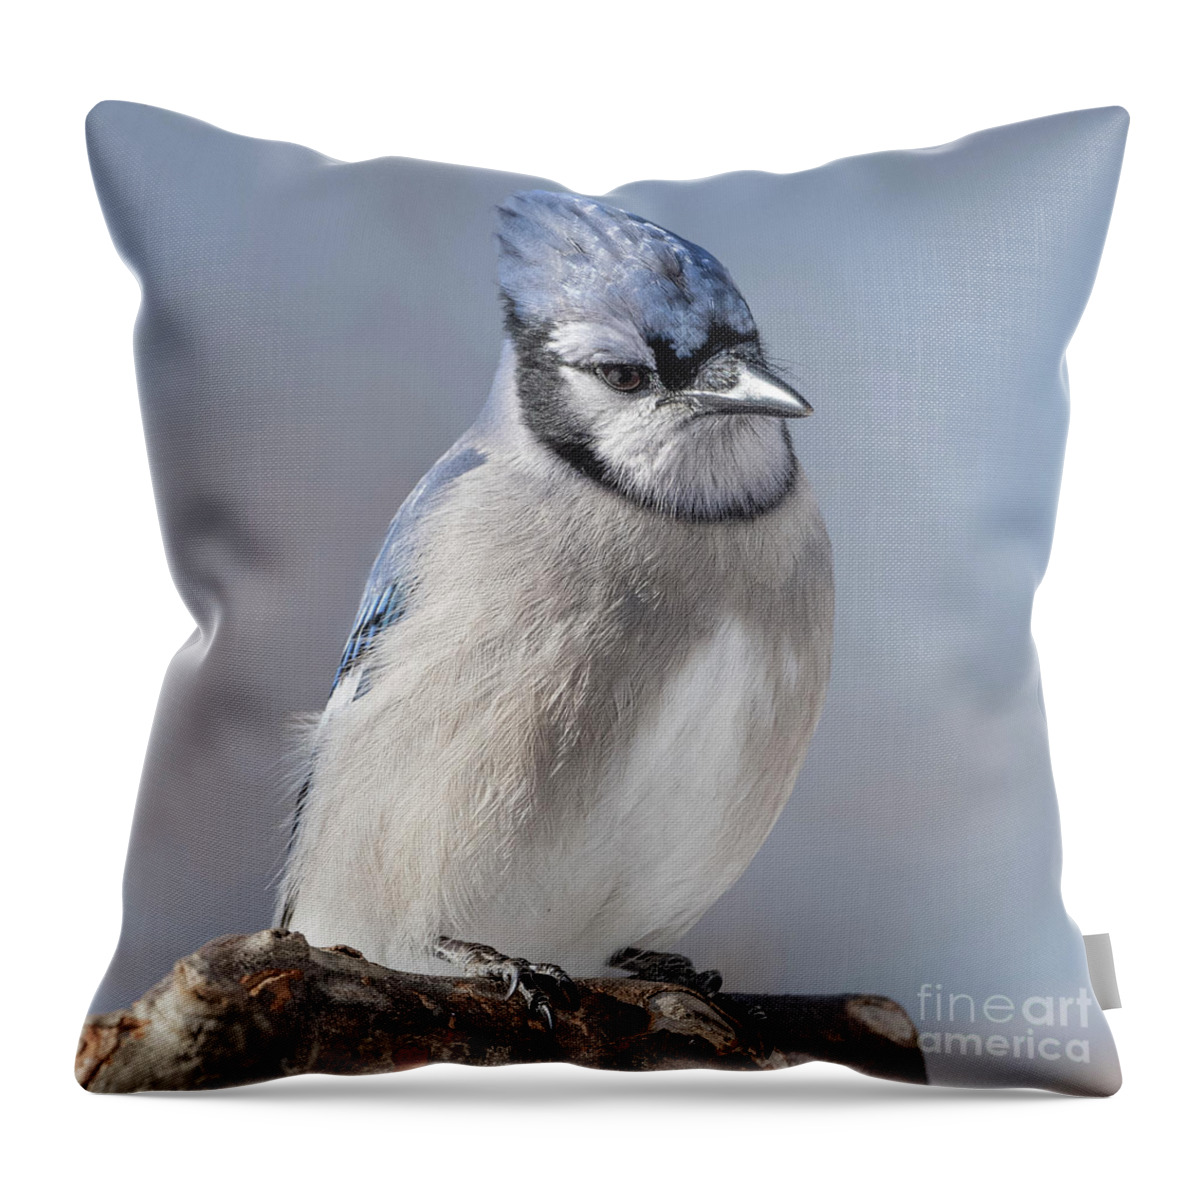  Throw Pillow featuring the photograph Blue Jay Sitting Pretty by Sandra Rust